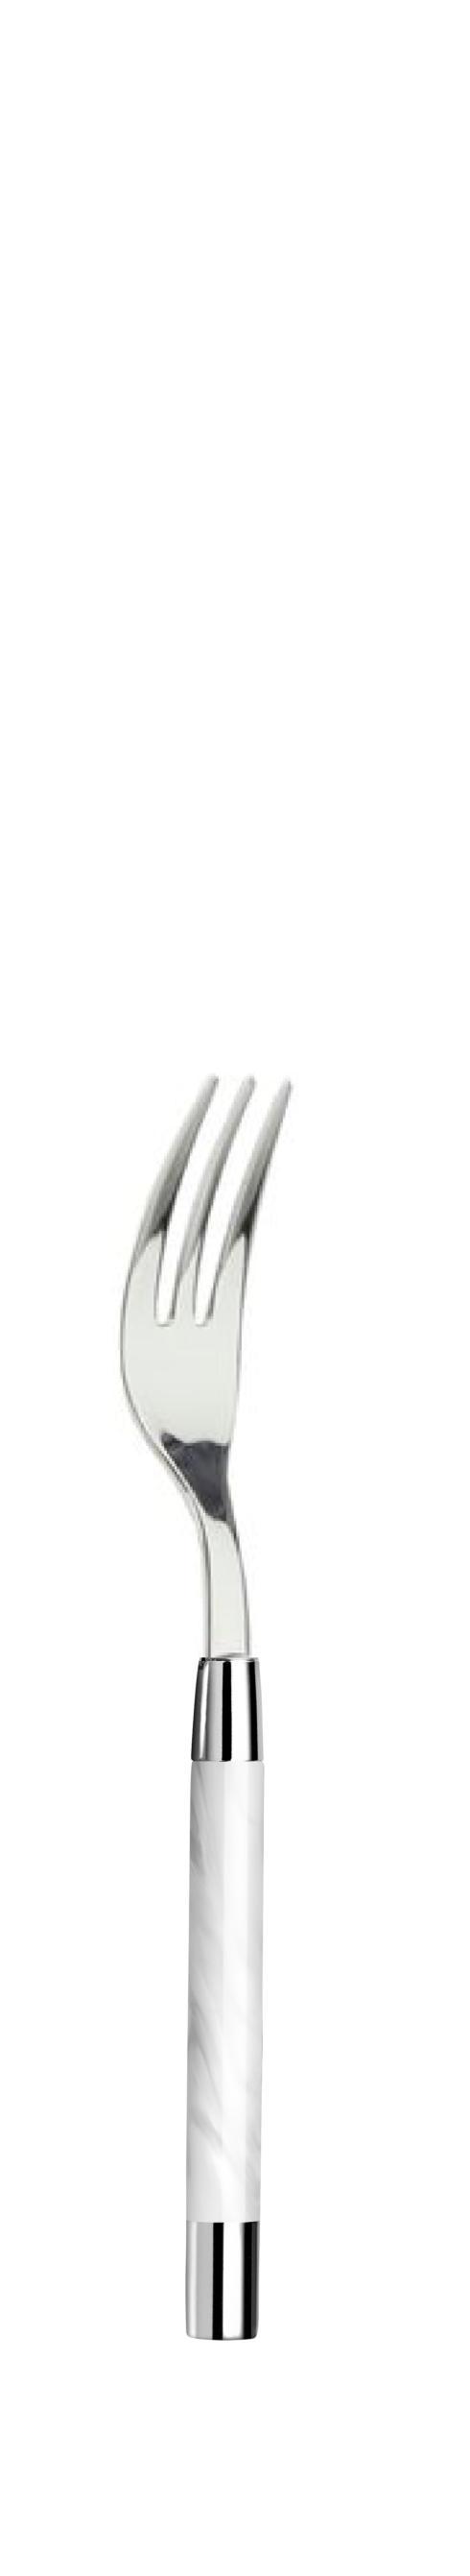 $27.00 Pastry fork